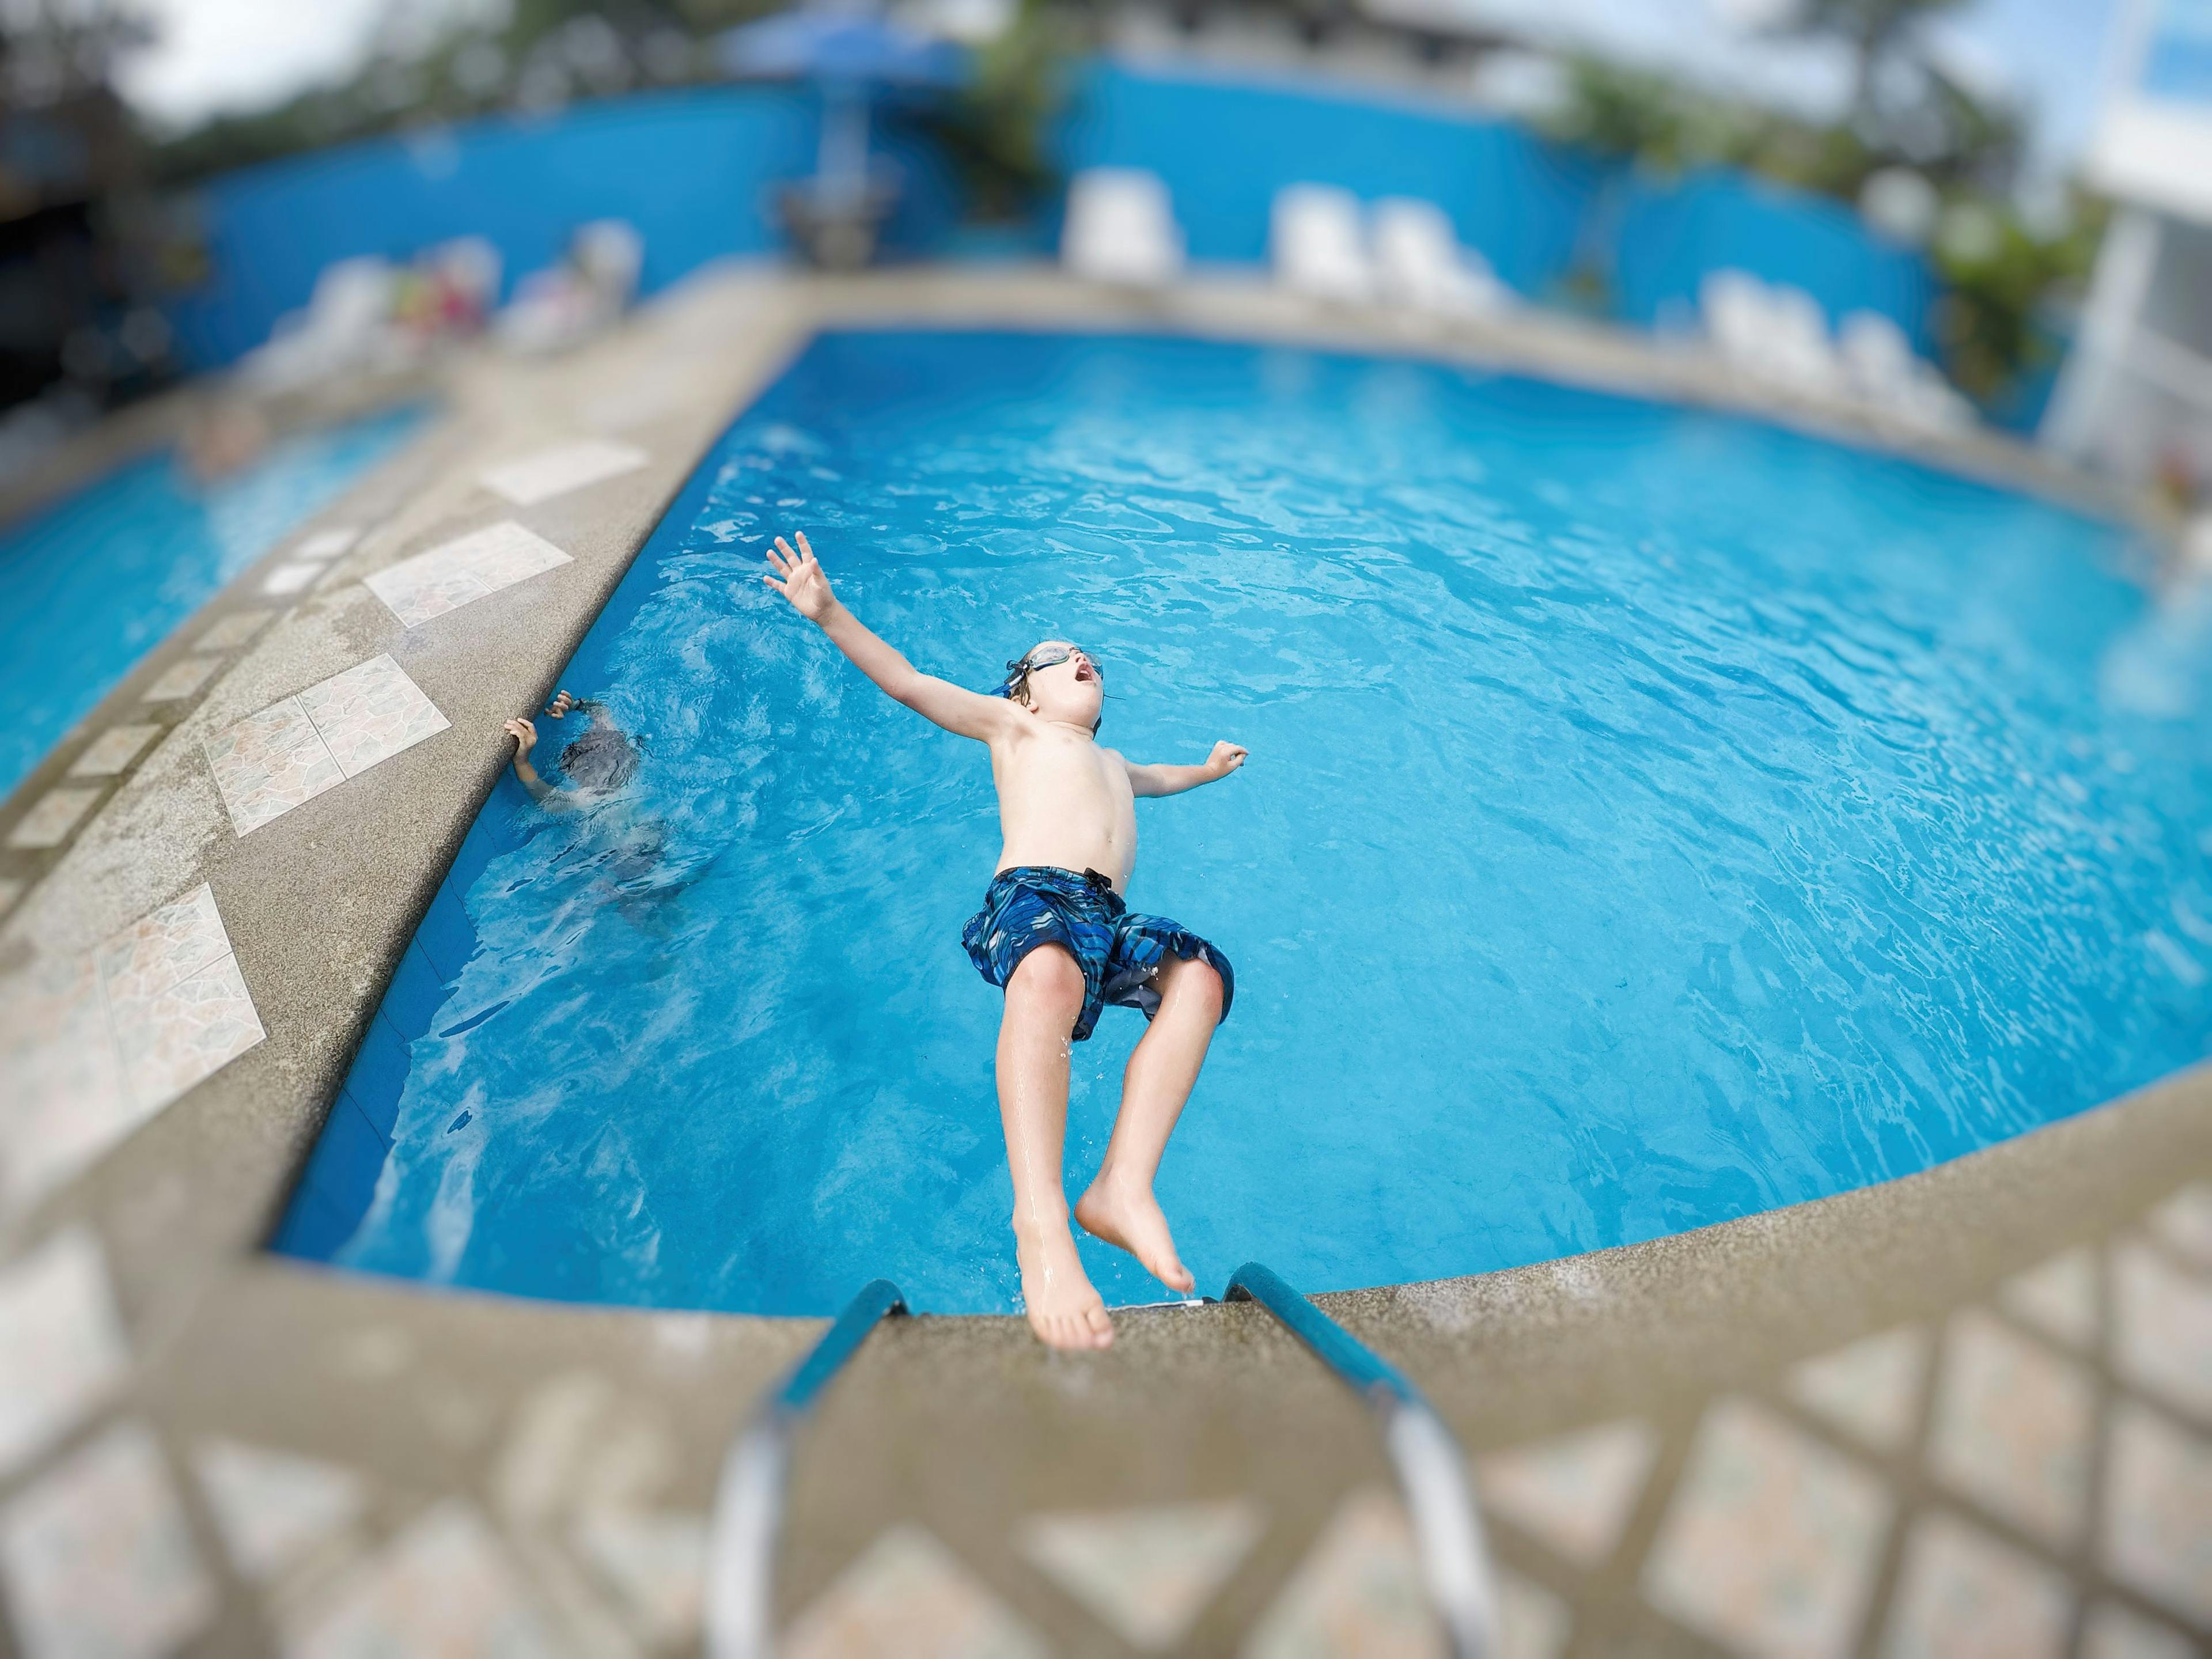 Related to Swimming Pool Accidents: Premises Liability and Pool Safety Regulations